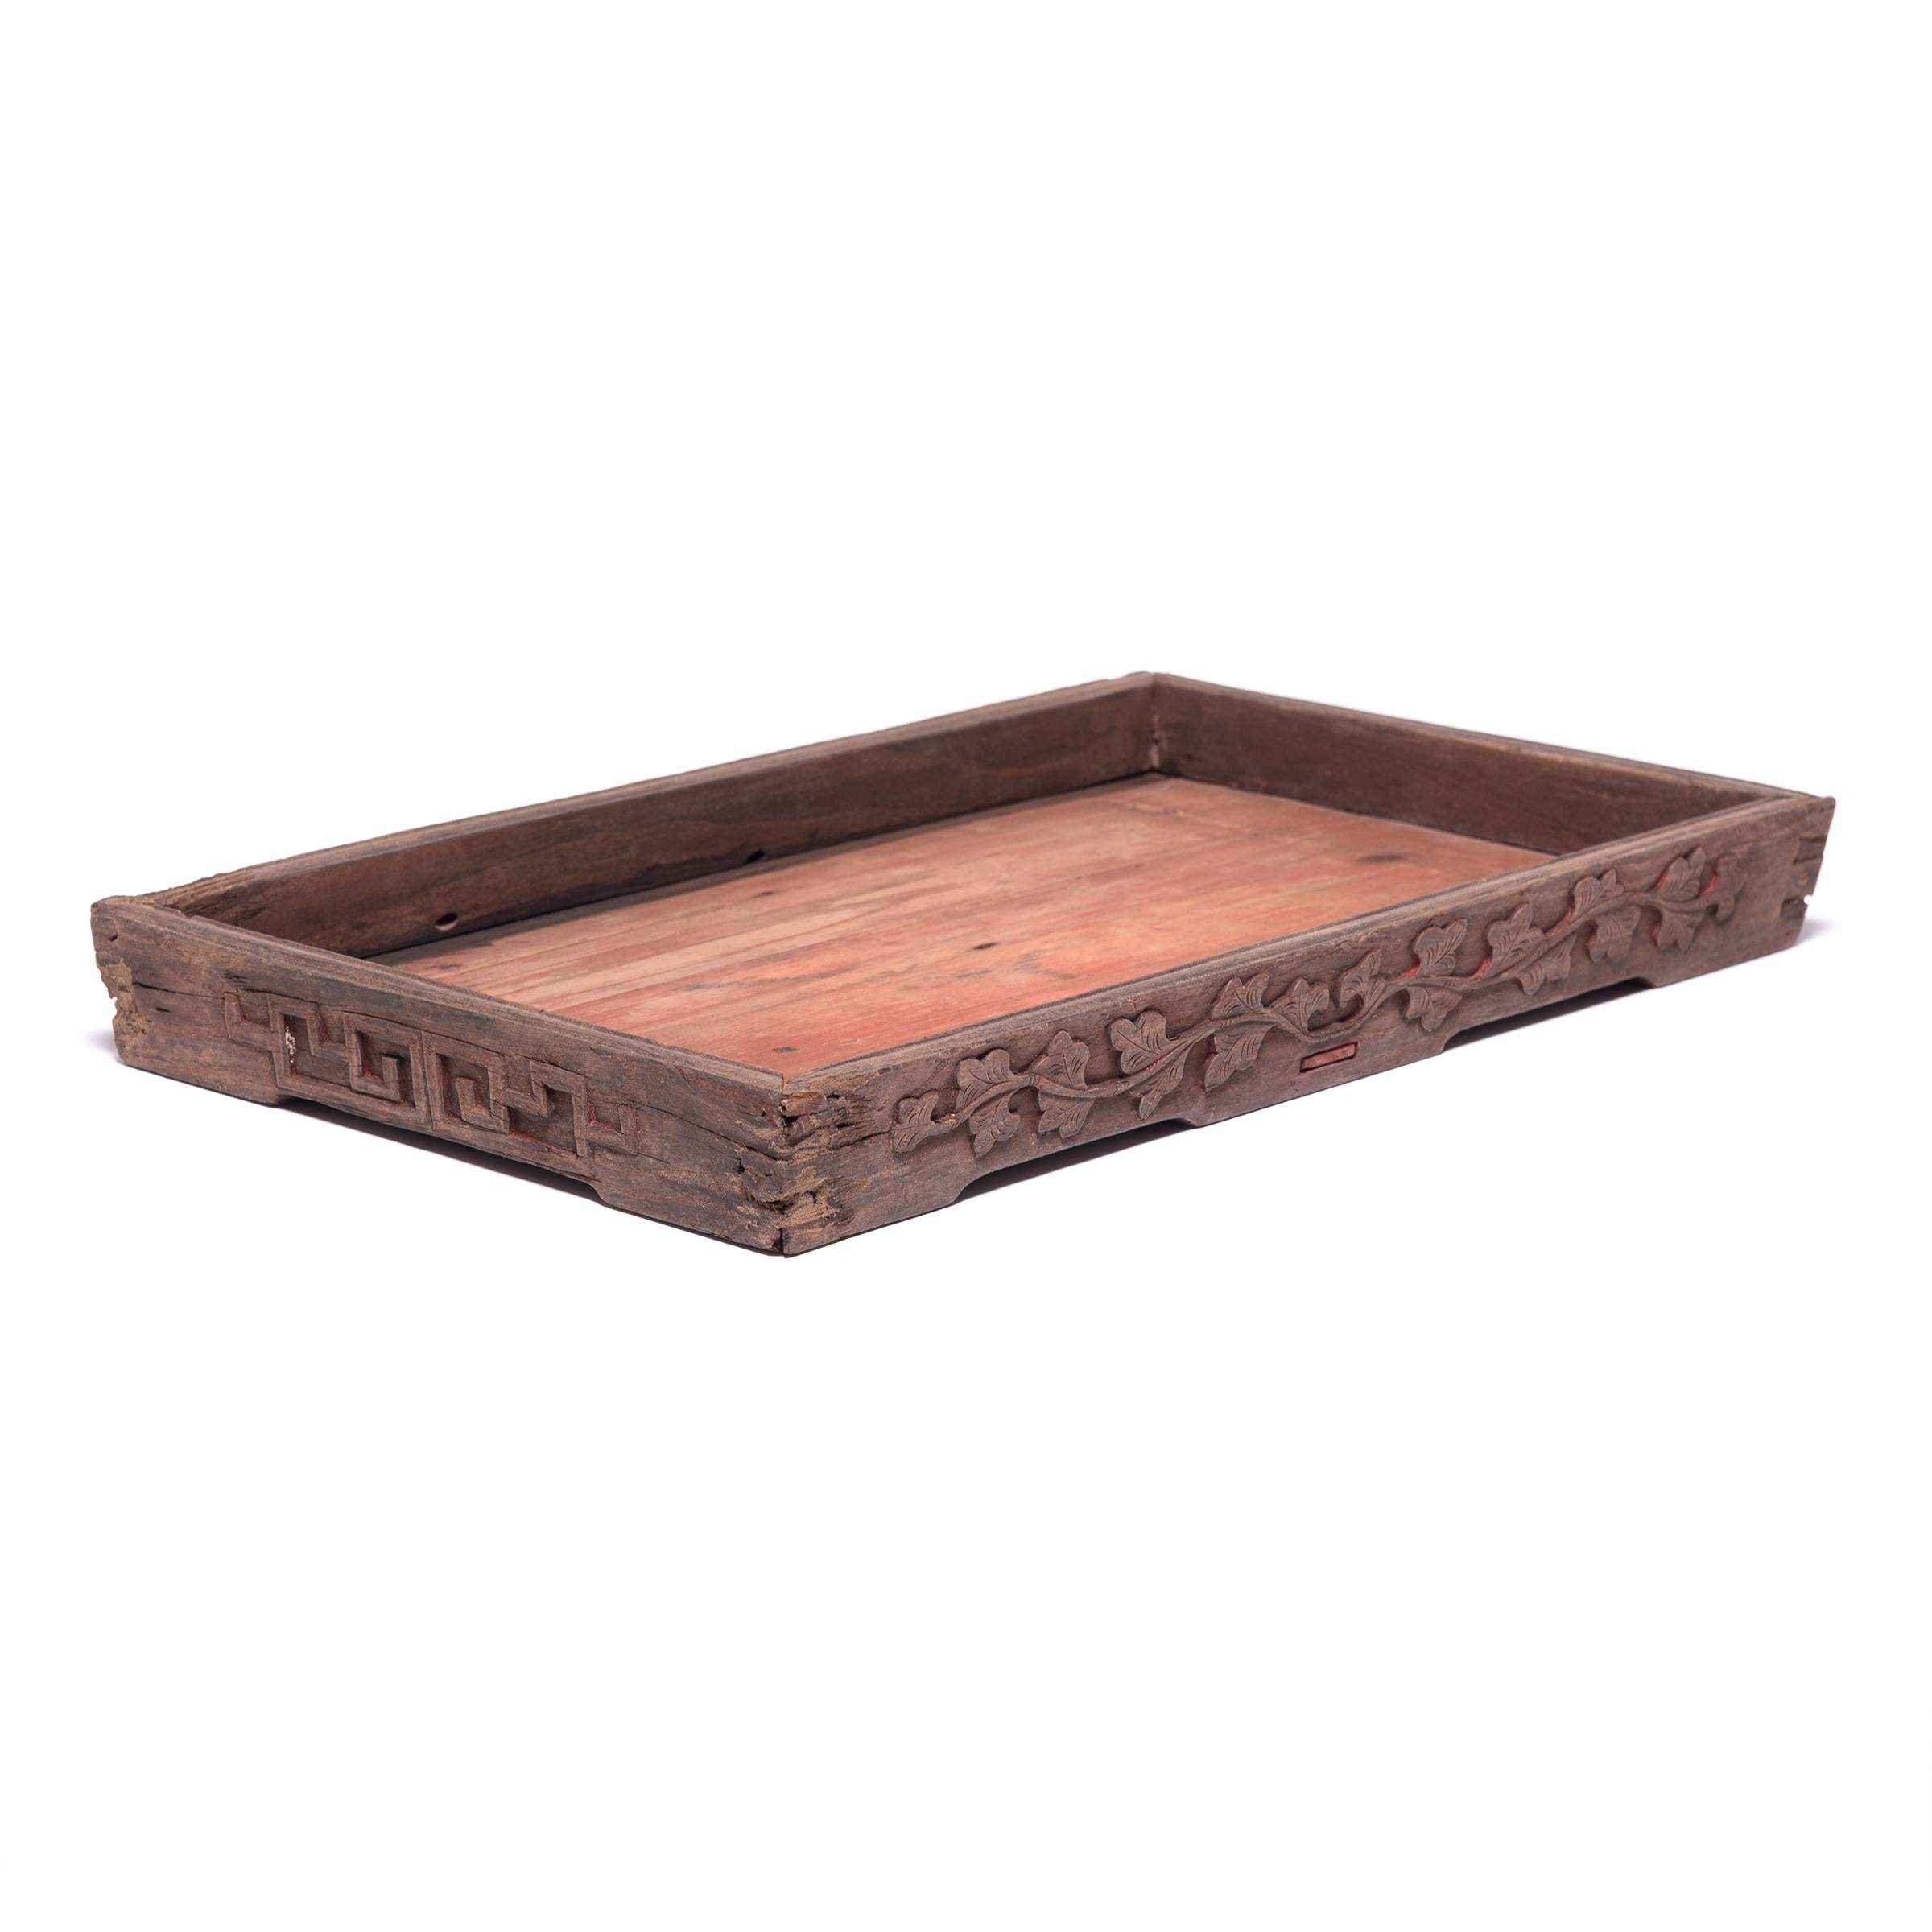 Finely carved floral and geometric motifs and a subtly recessed base give the simple lines of this century-old tray true provincial elegance. It has developed great character from years of serving tea, likely for friends and family gathered on